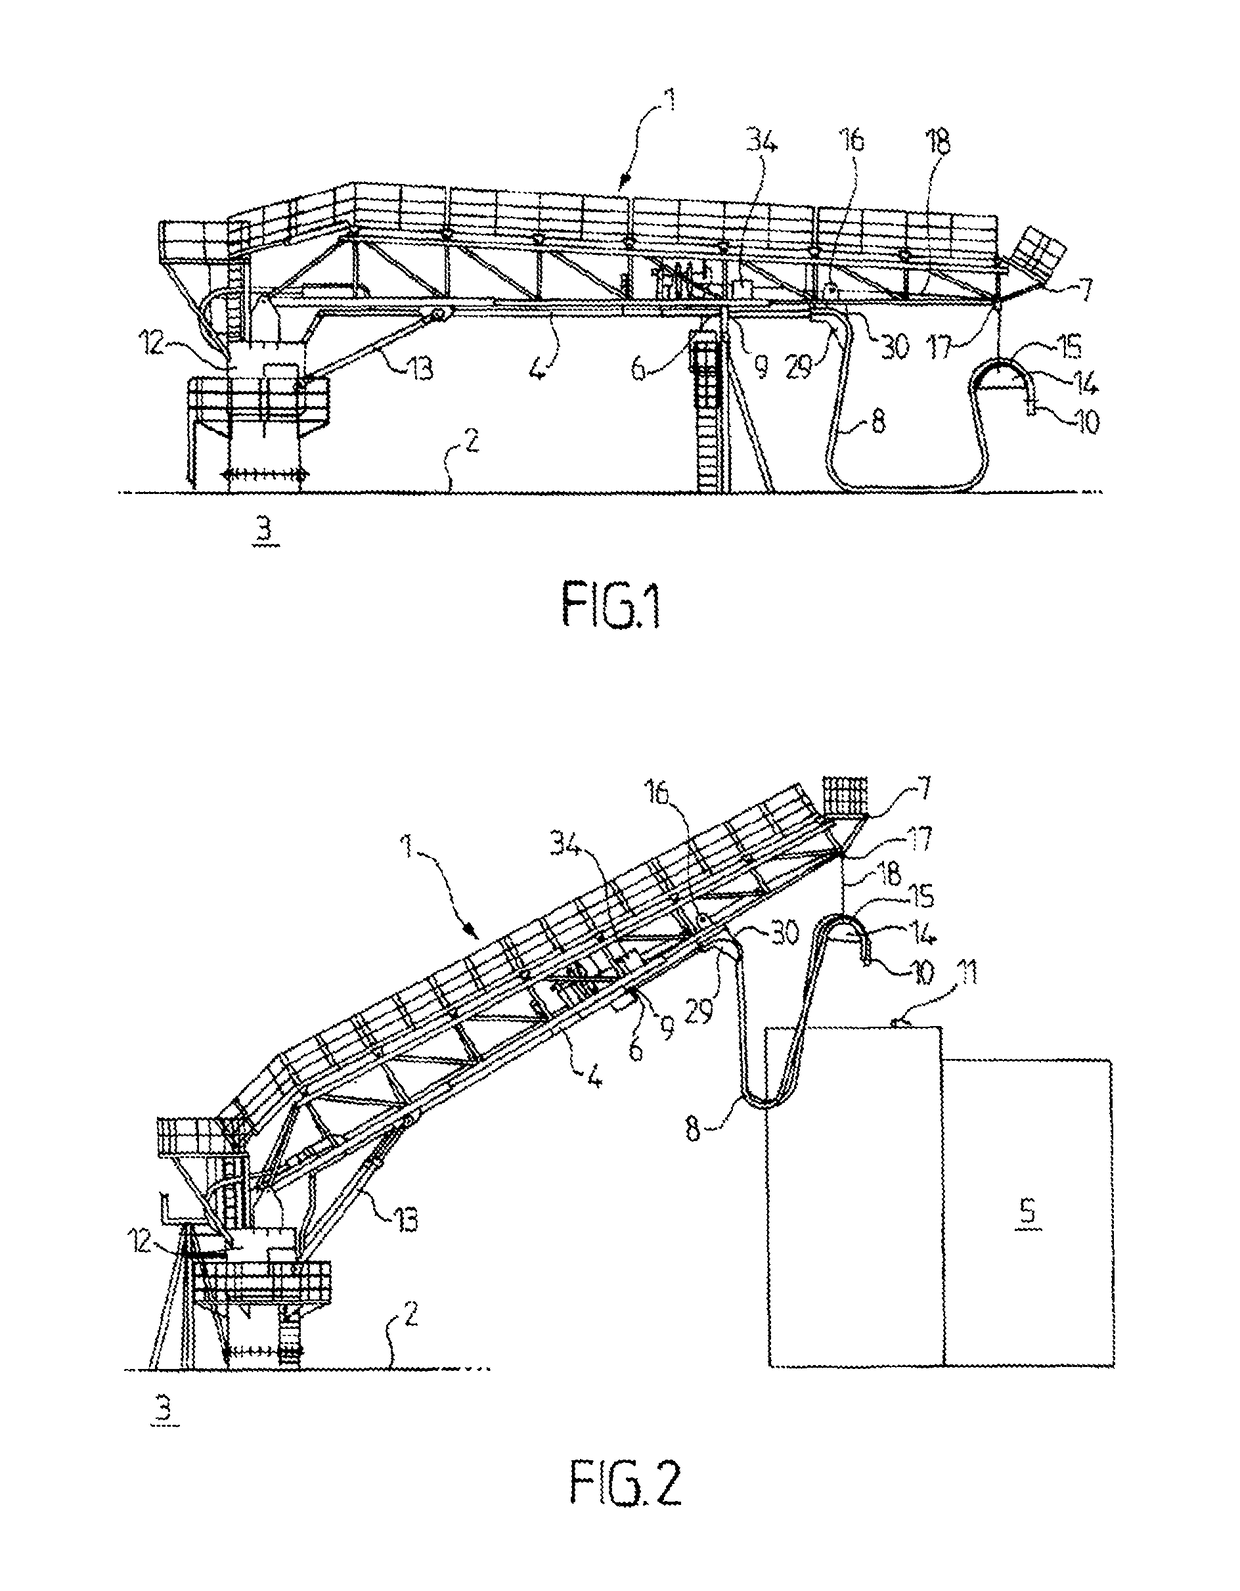 System for transferring fluid between a ship and a facility, such as a client ship